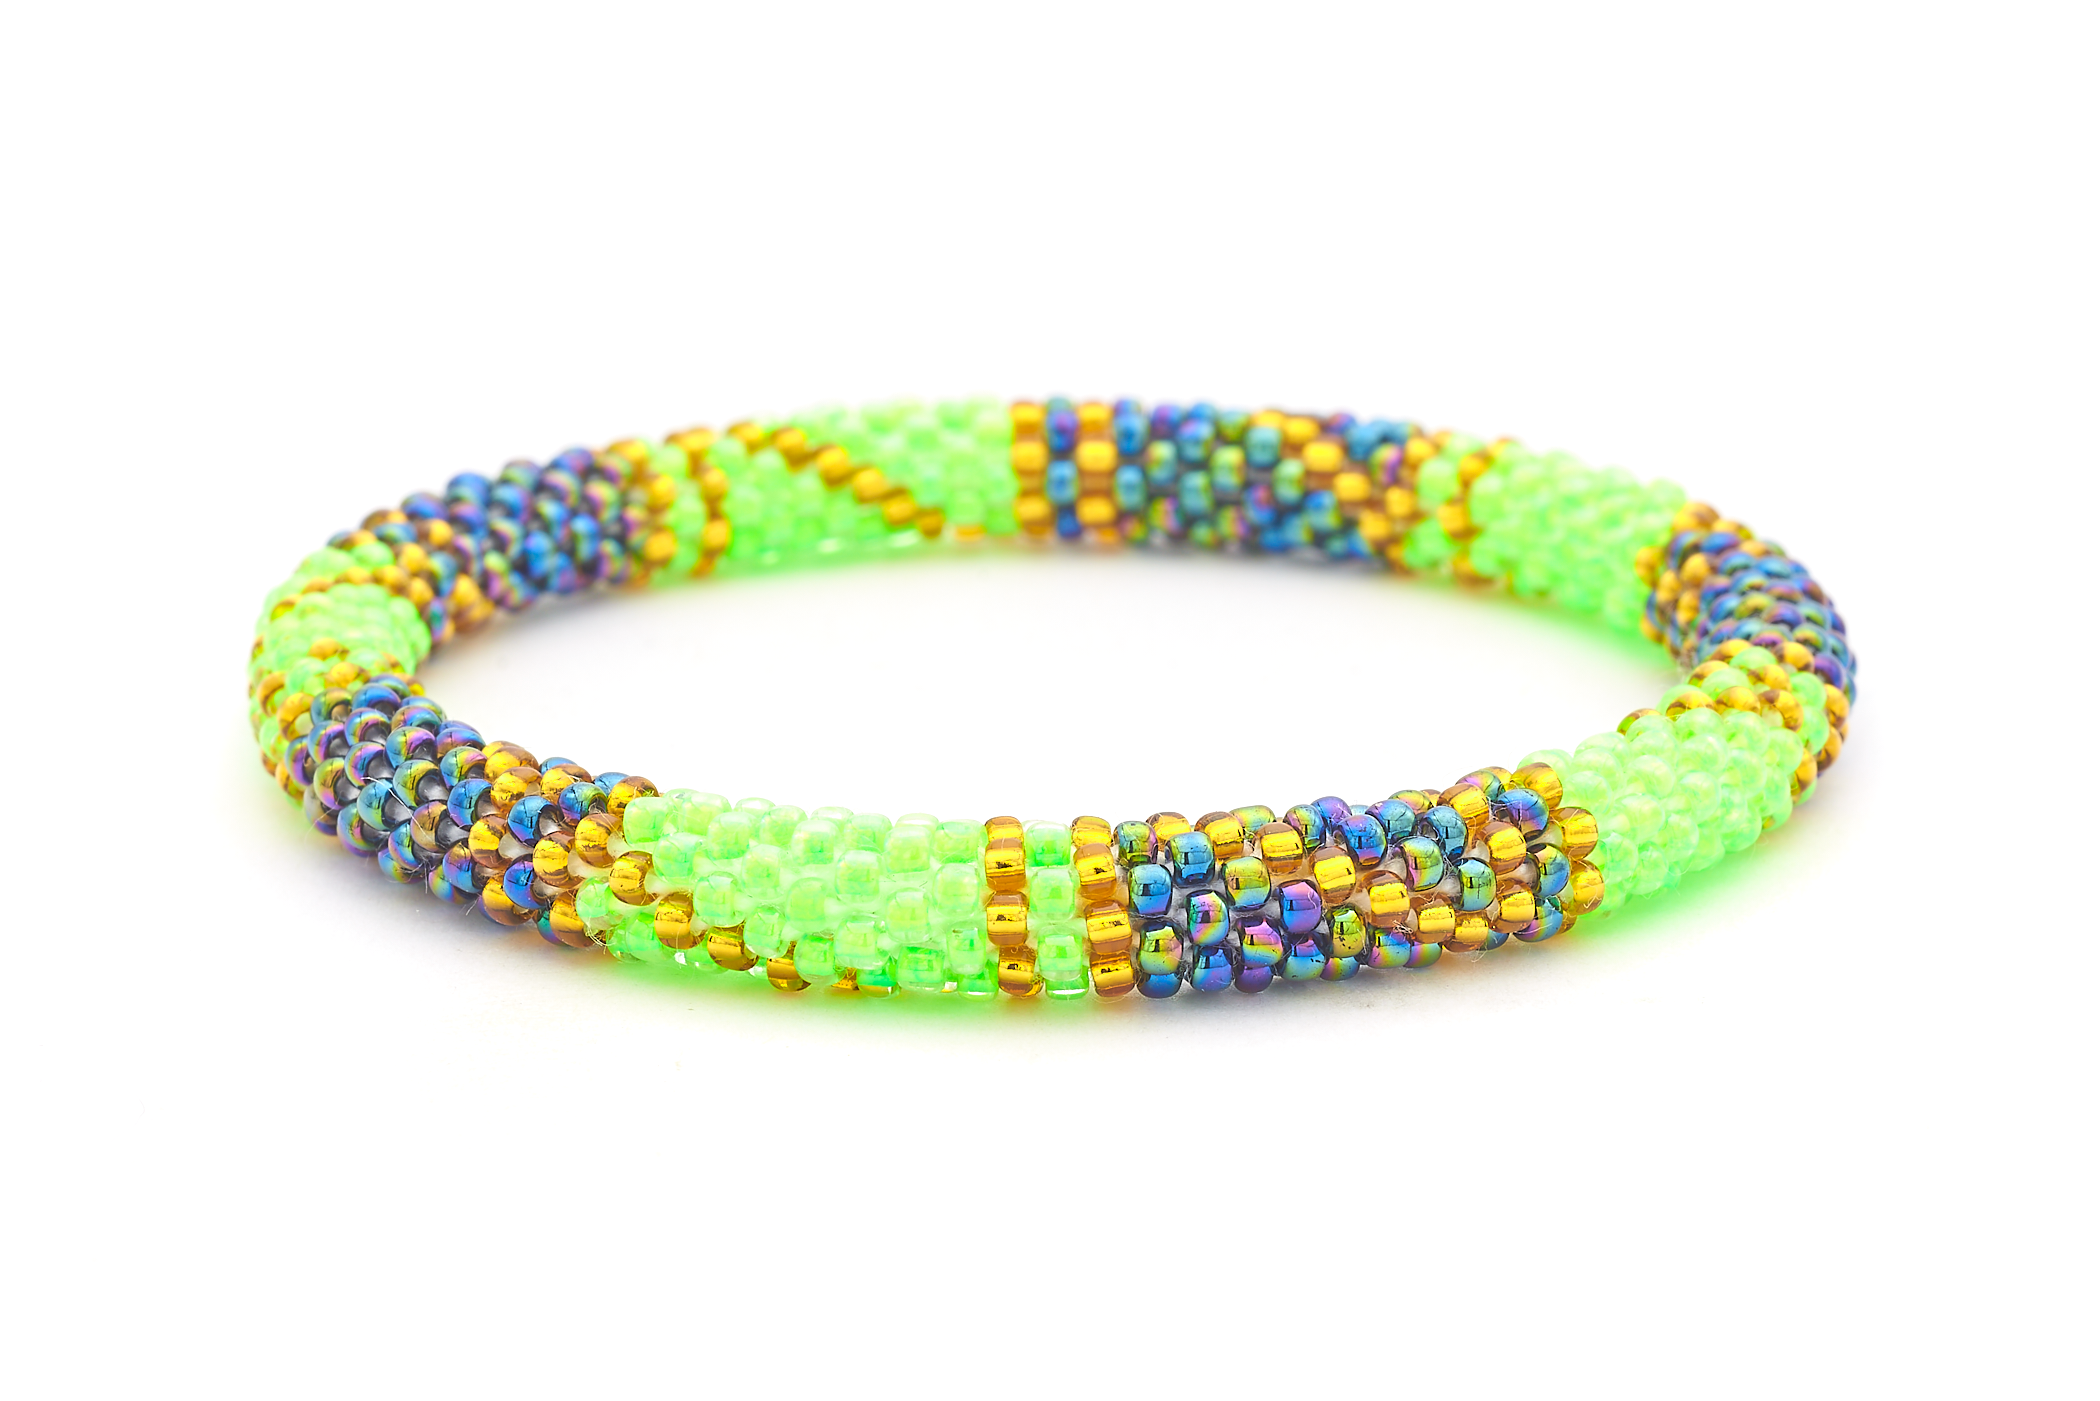 Handmade glass bead bracelet from Nepal, featuring a roll design. Also known as a beaded bracelet, seed bead bracelet, beach glass bracelet, or sea glass bracelet